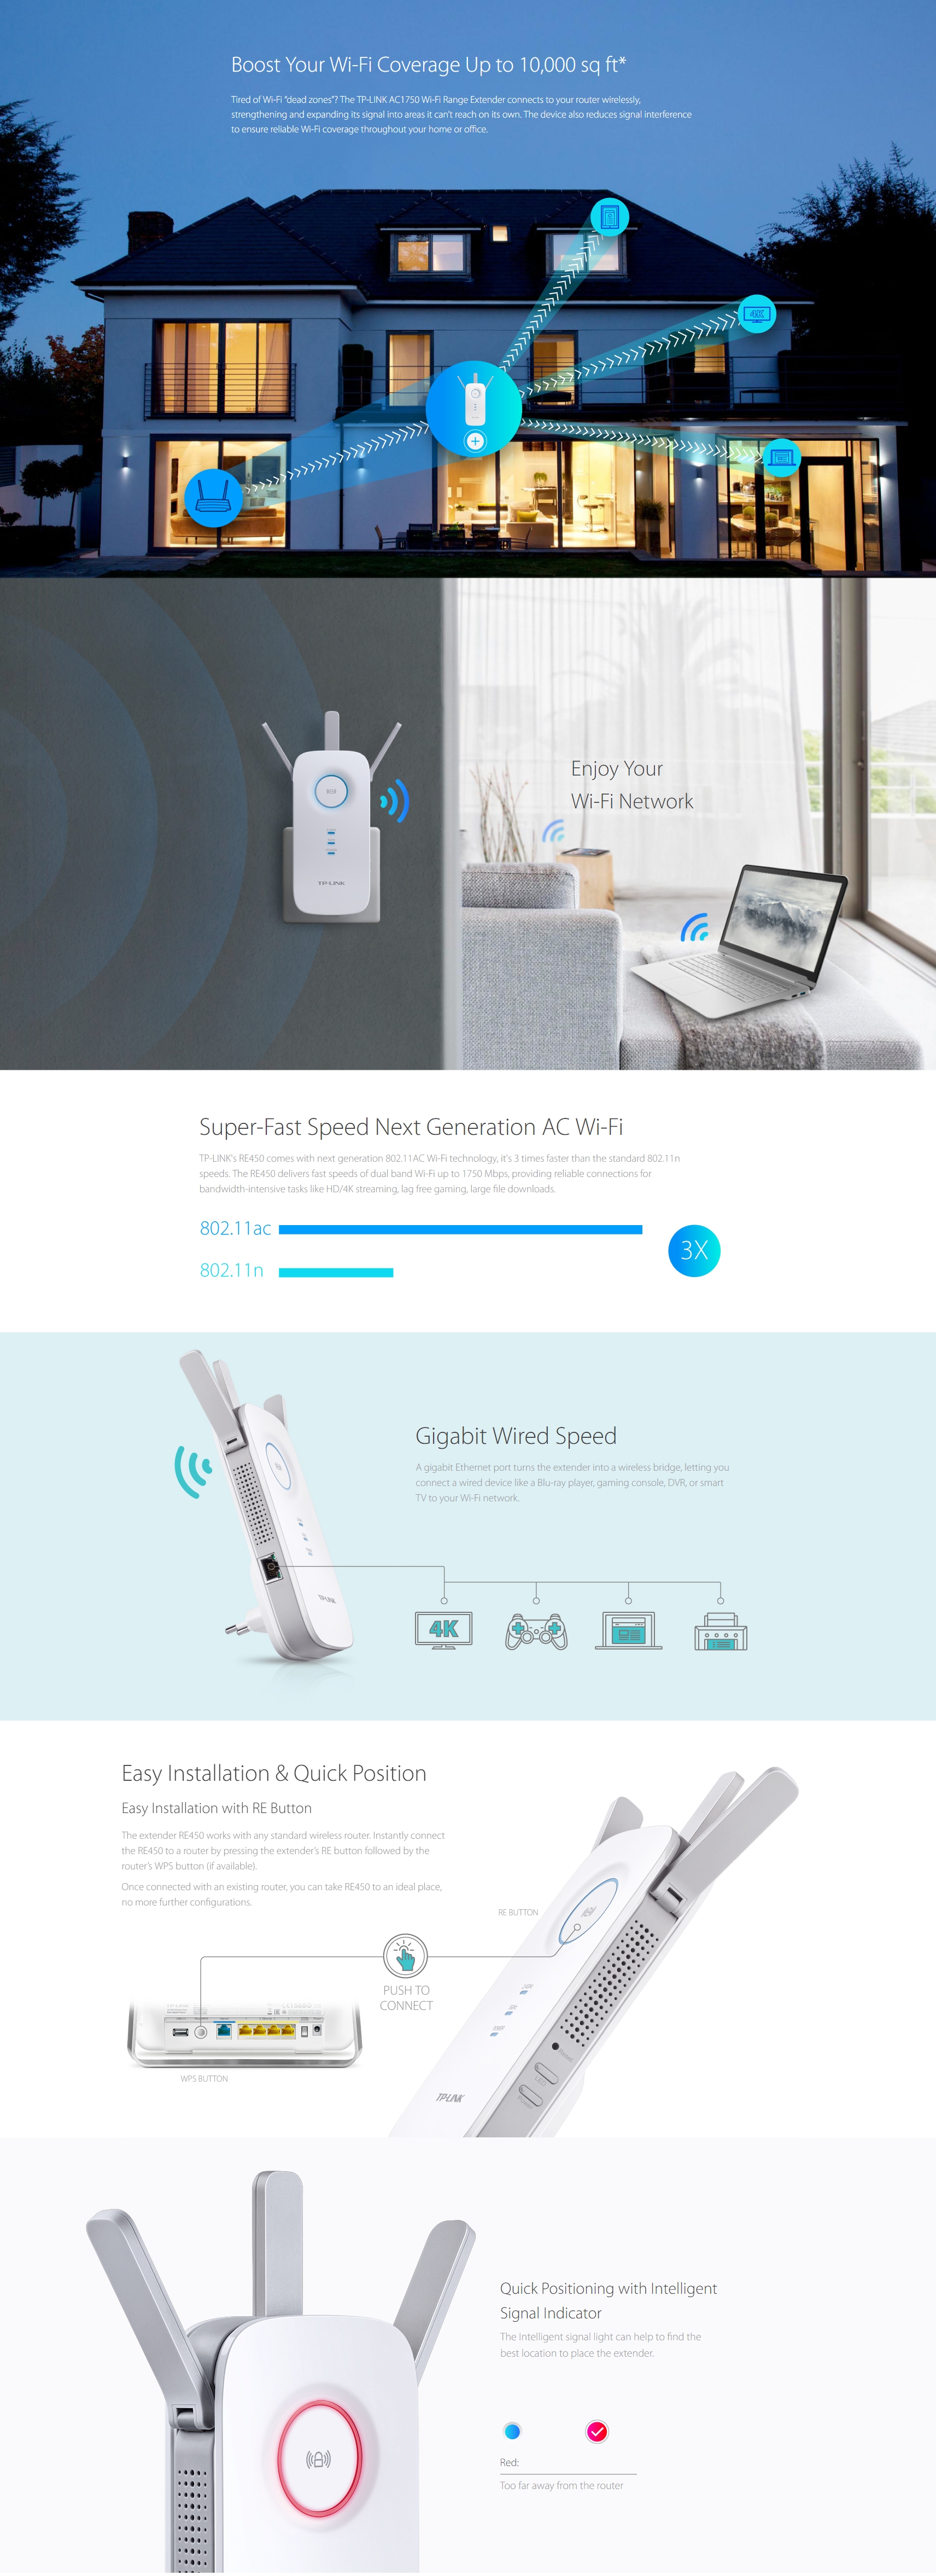 A large marketing image providing additional information about the product TP-Link RE450 AC1750 WiFi Range Extender - Additional alt info not provided